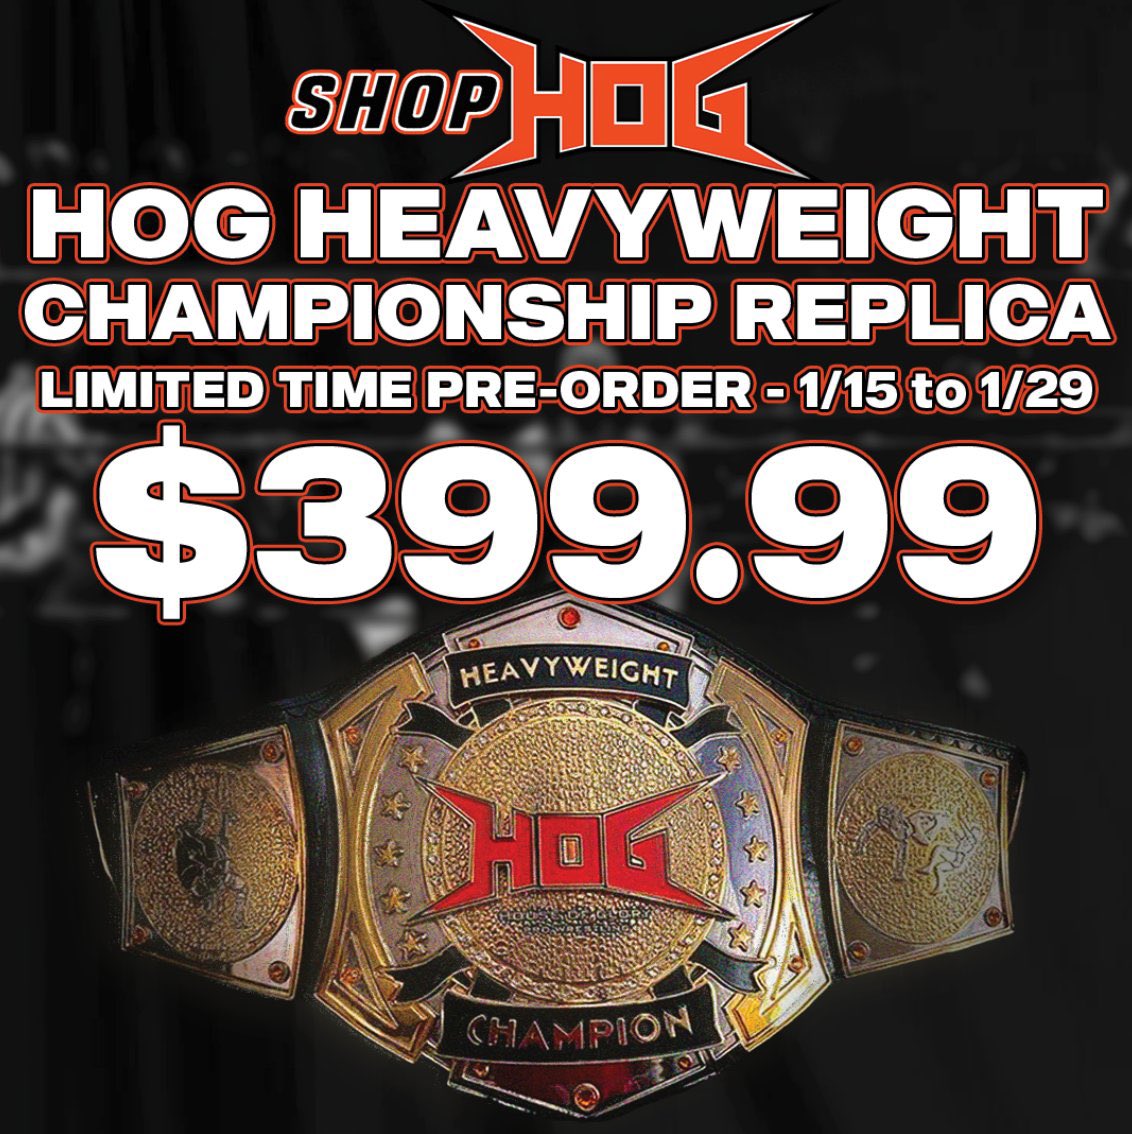 Preorder your HOG Heavyweight Championship replica belt now at #SHOPHOG Now through January 29 Expected to ship in late March/ early April Free shipping with purchase SHOPHOG.NET #HOG #HOGWrestling #Prowrestling #Championships #Wrestlingbelts